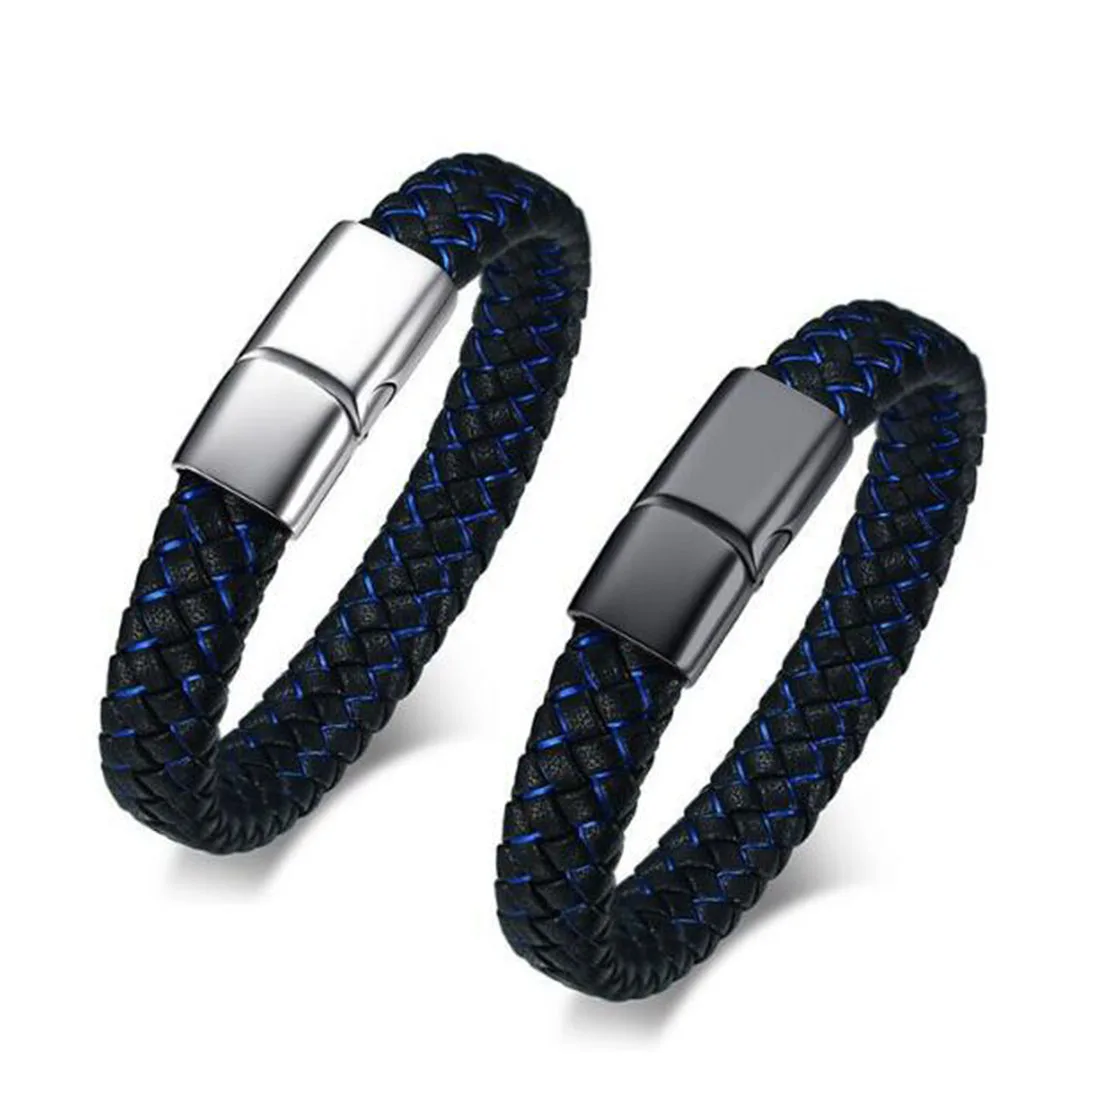 

BRJSF00234 12MM Wide High Quality Mens Womens PU Leather Braided Punk Bracelet Magnetic Clasp, Black